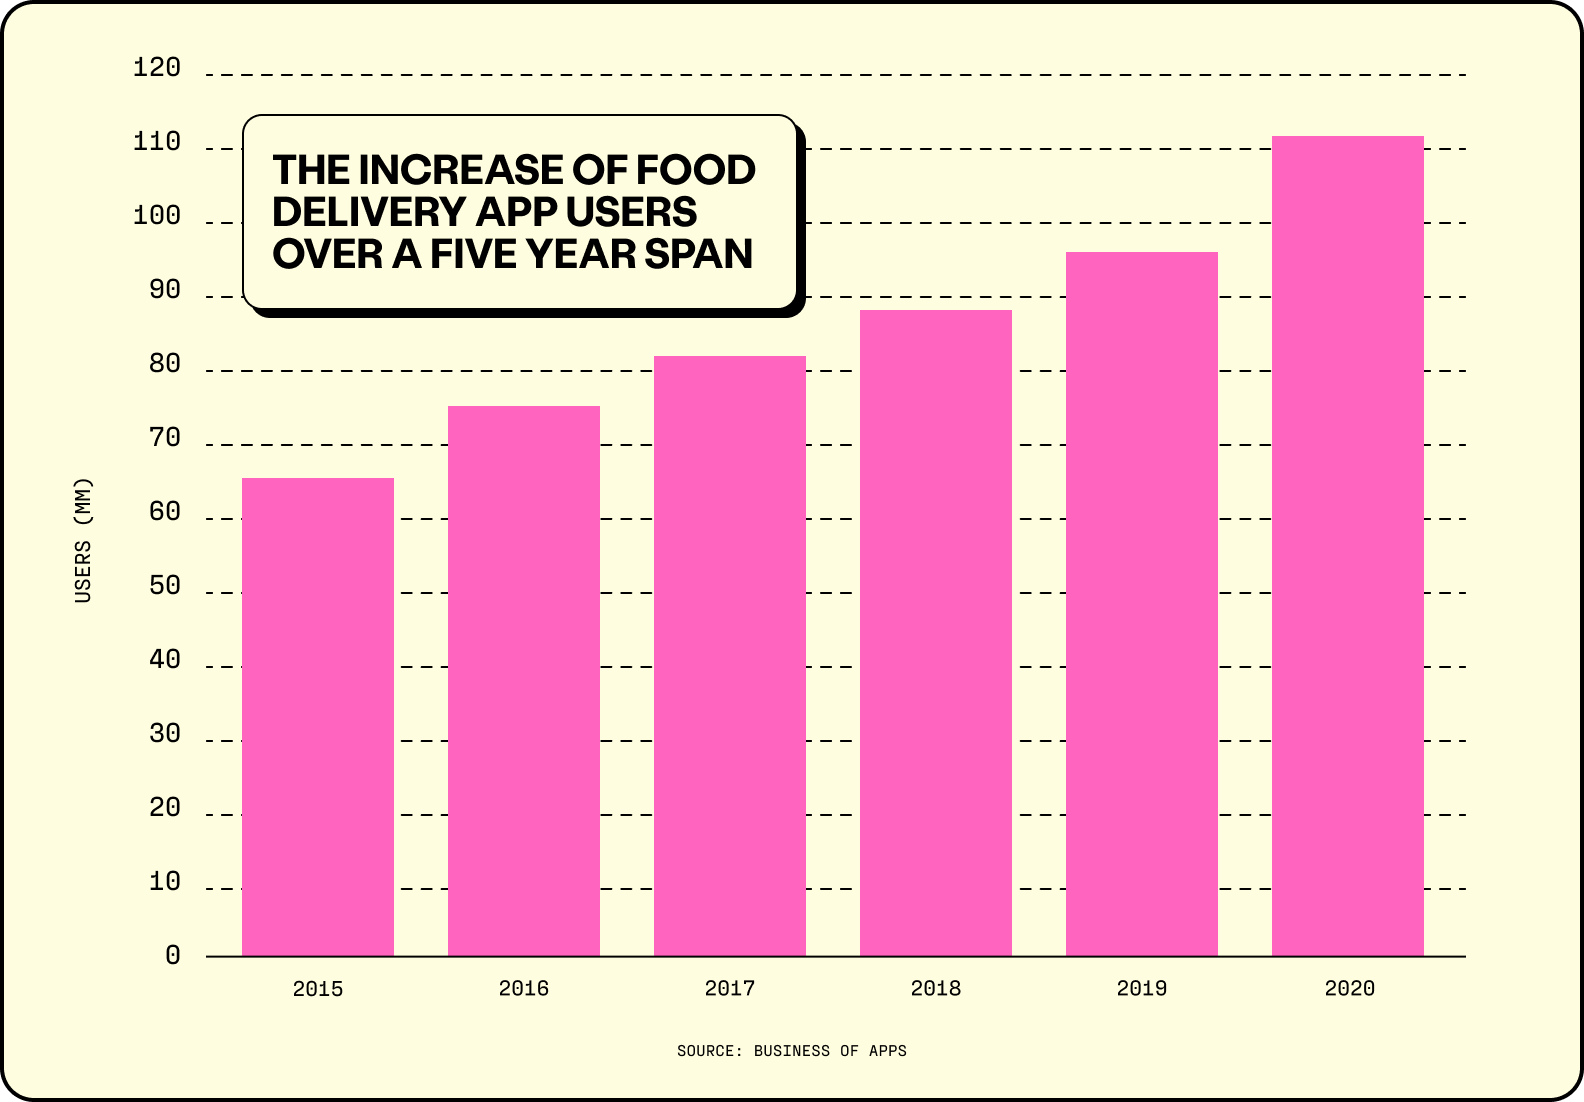 Increase of Food Delivery App Users